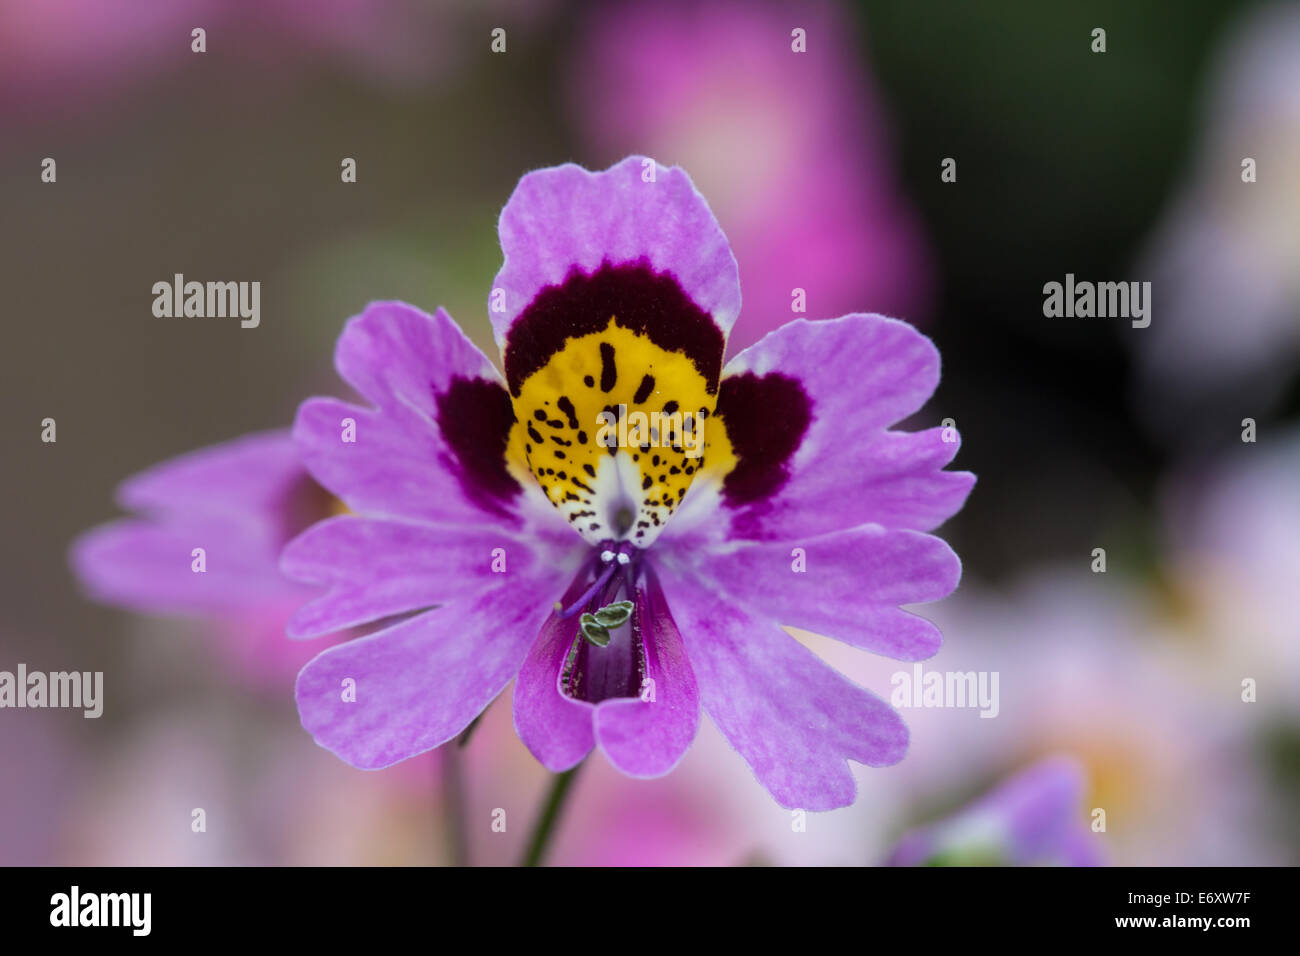 Butterfly flower (Schizanthus) brightly coloured flowers Stock Photo